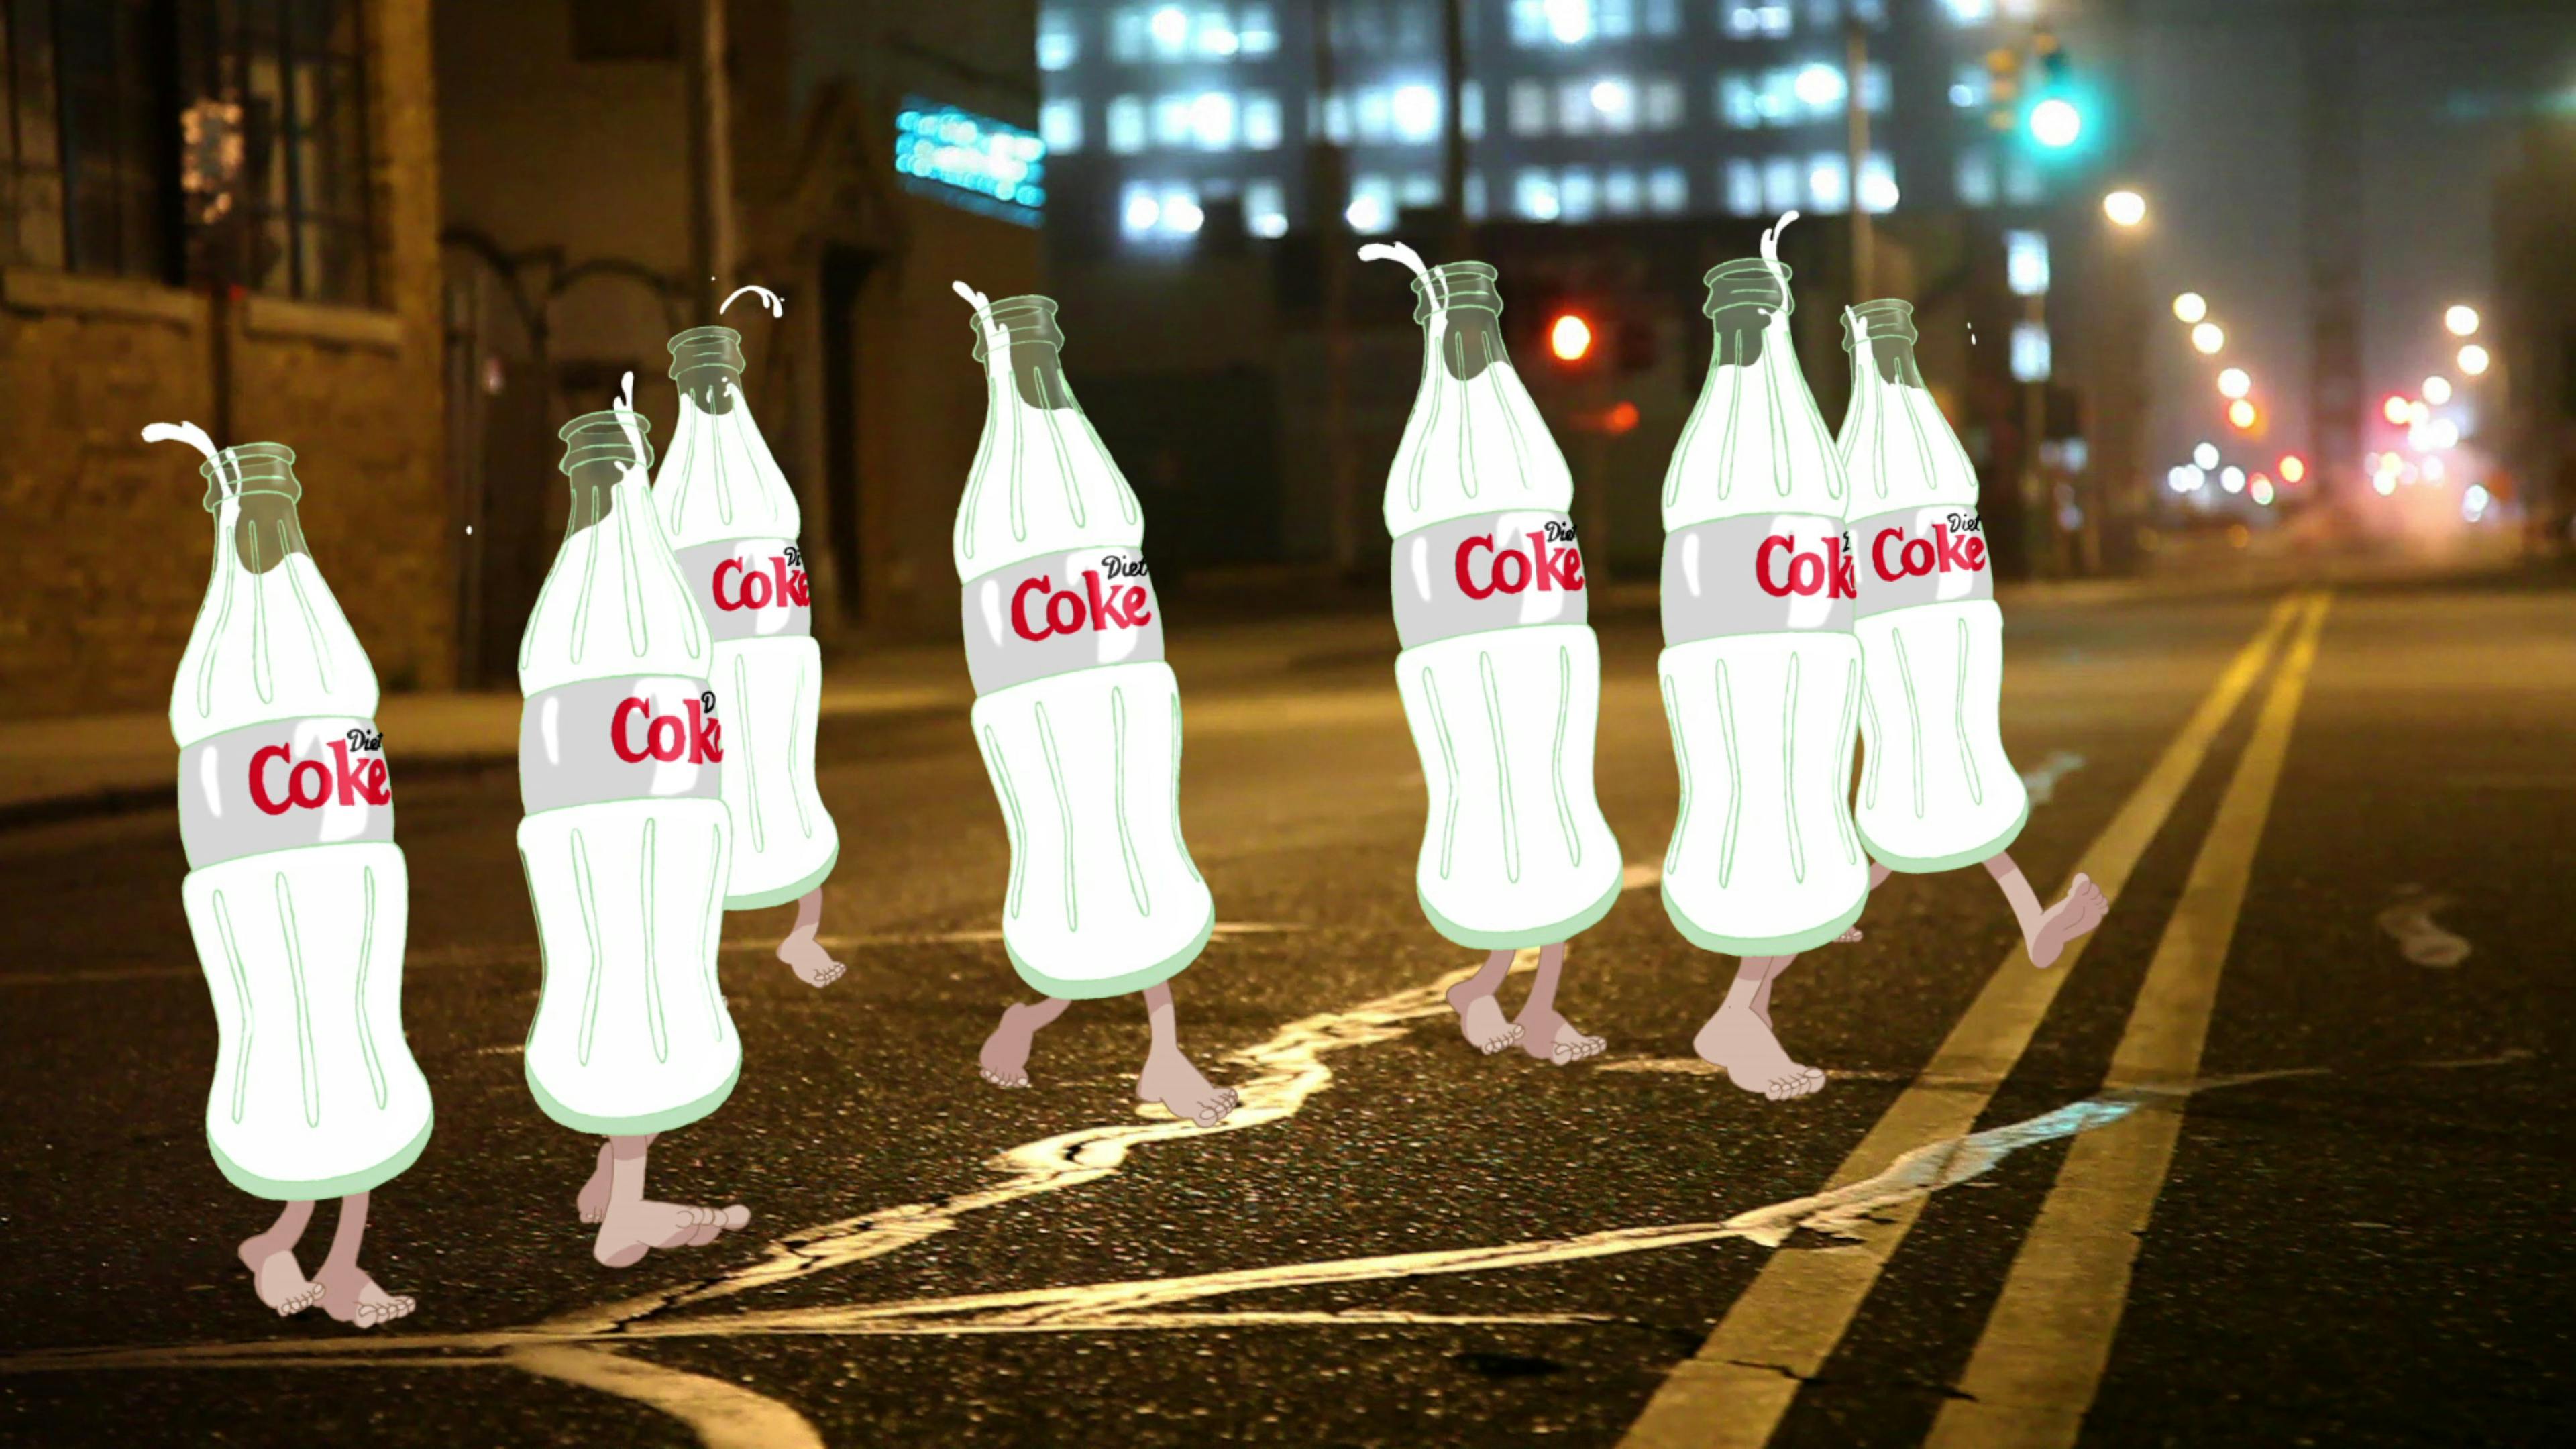 A photograph of a city street at night, taken from a low vantage point, is overlaid with 7 illustrated Coca-Cola bottles with white liquid. The bottles have bare feet and appear to cross the street.